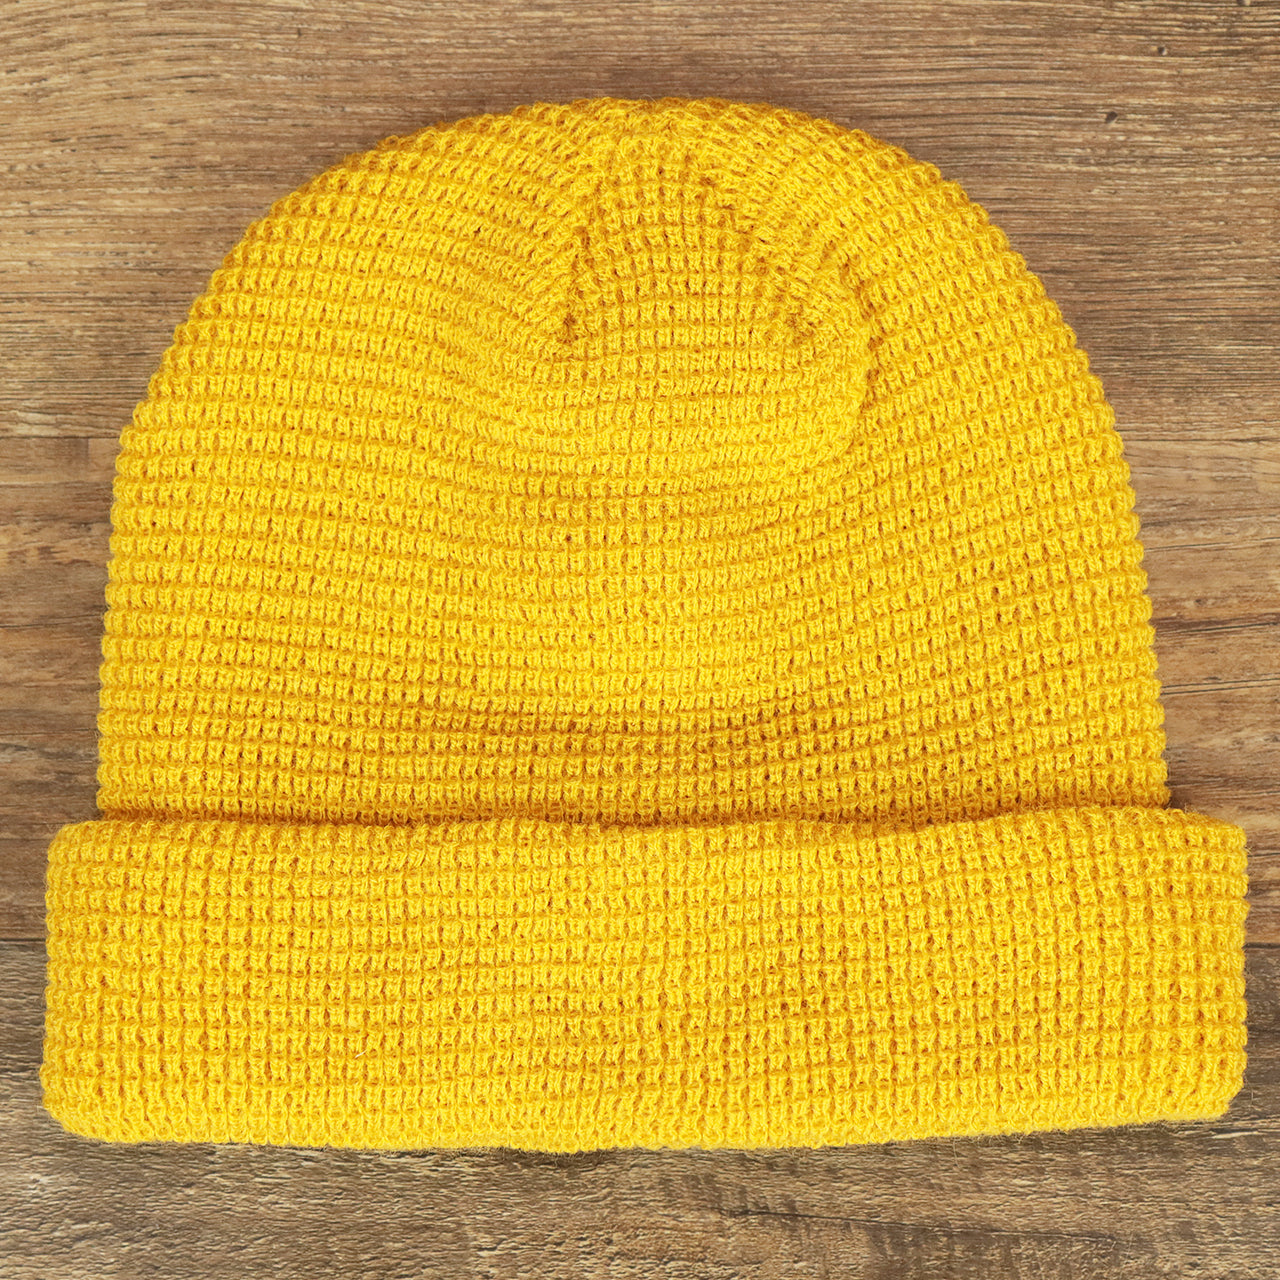 The front of the Mustard Golden Yellow Fisherman Knit Cuffed Beanie